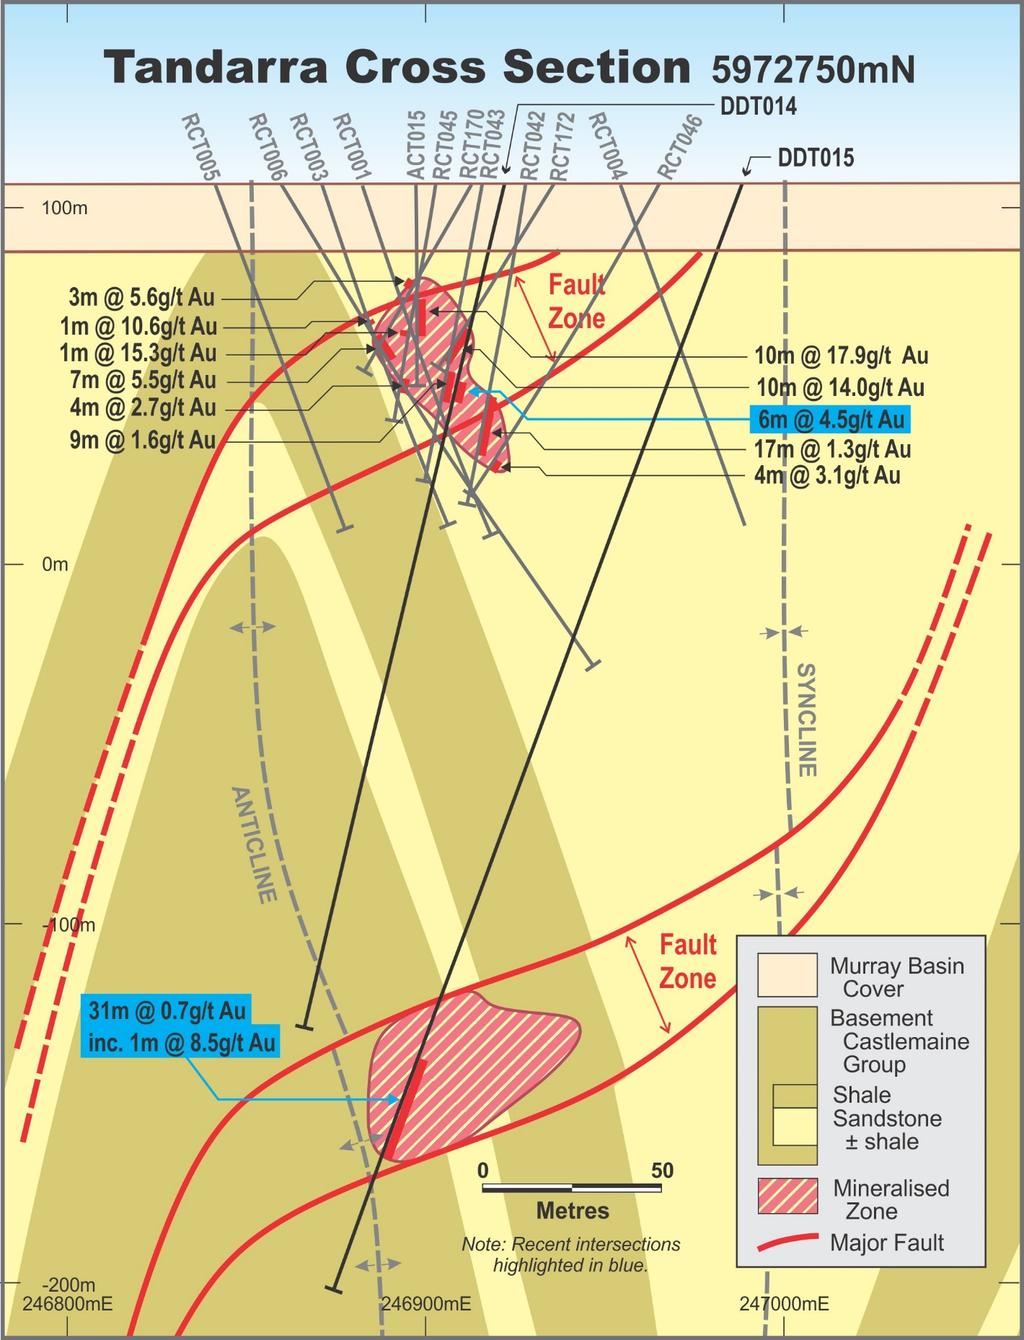 Figure 4 Tandarra Cross Section at 5,972,750N showing zone of deeper gold